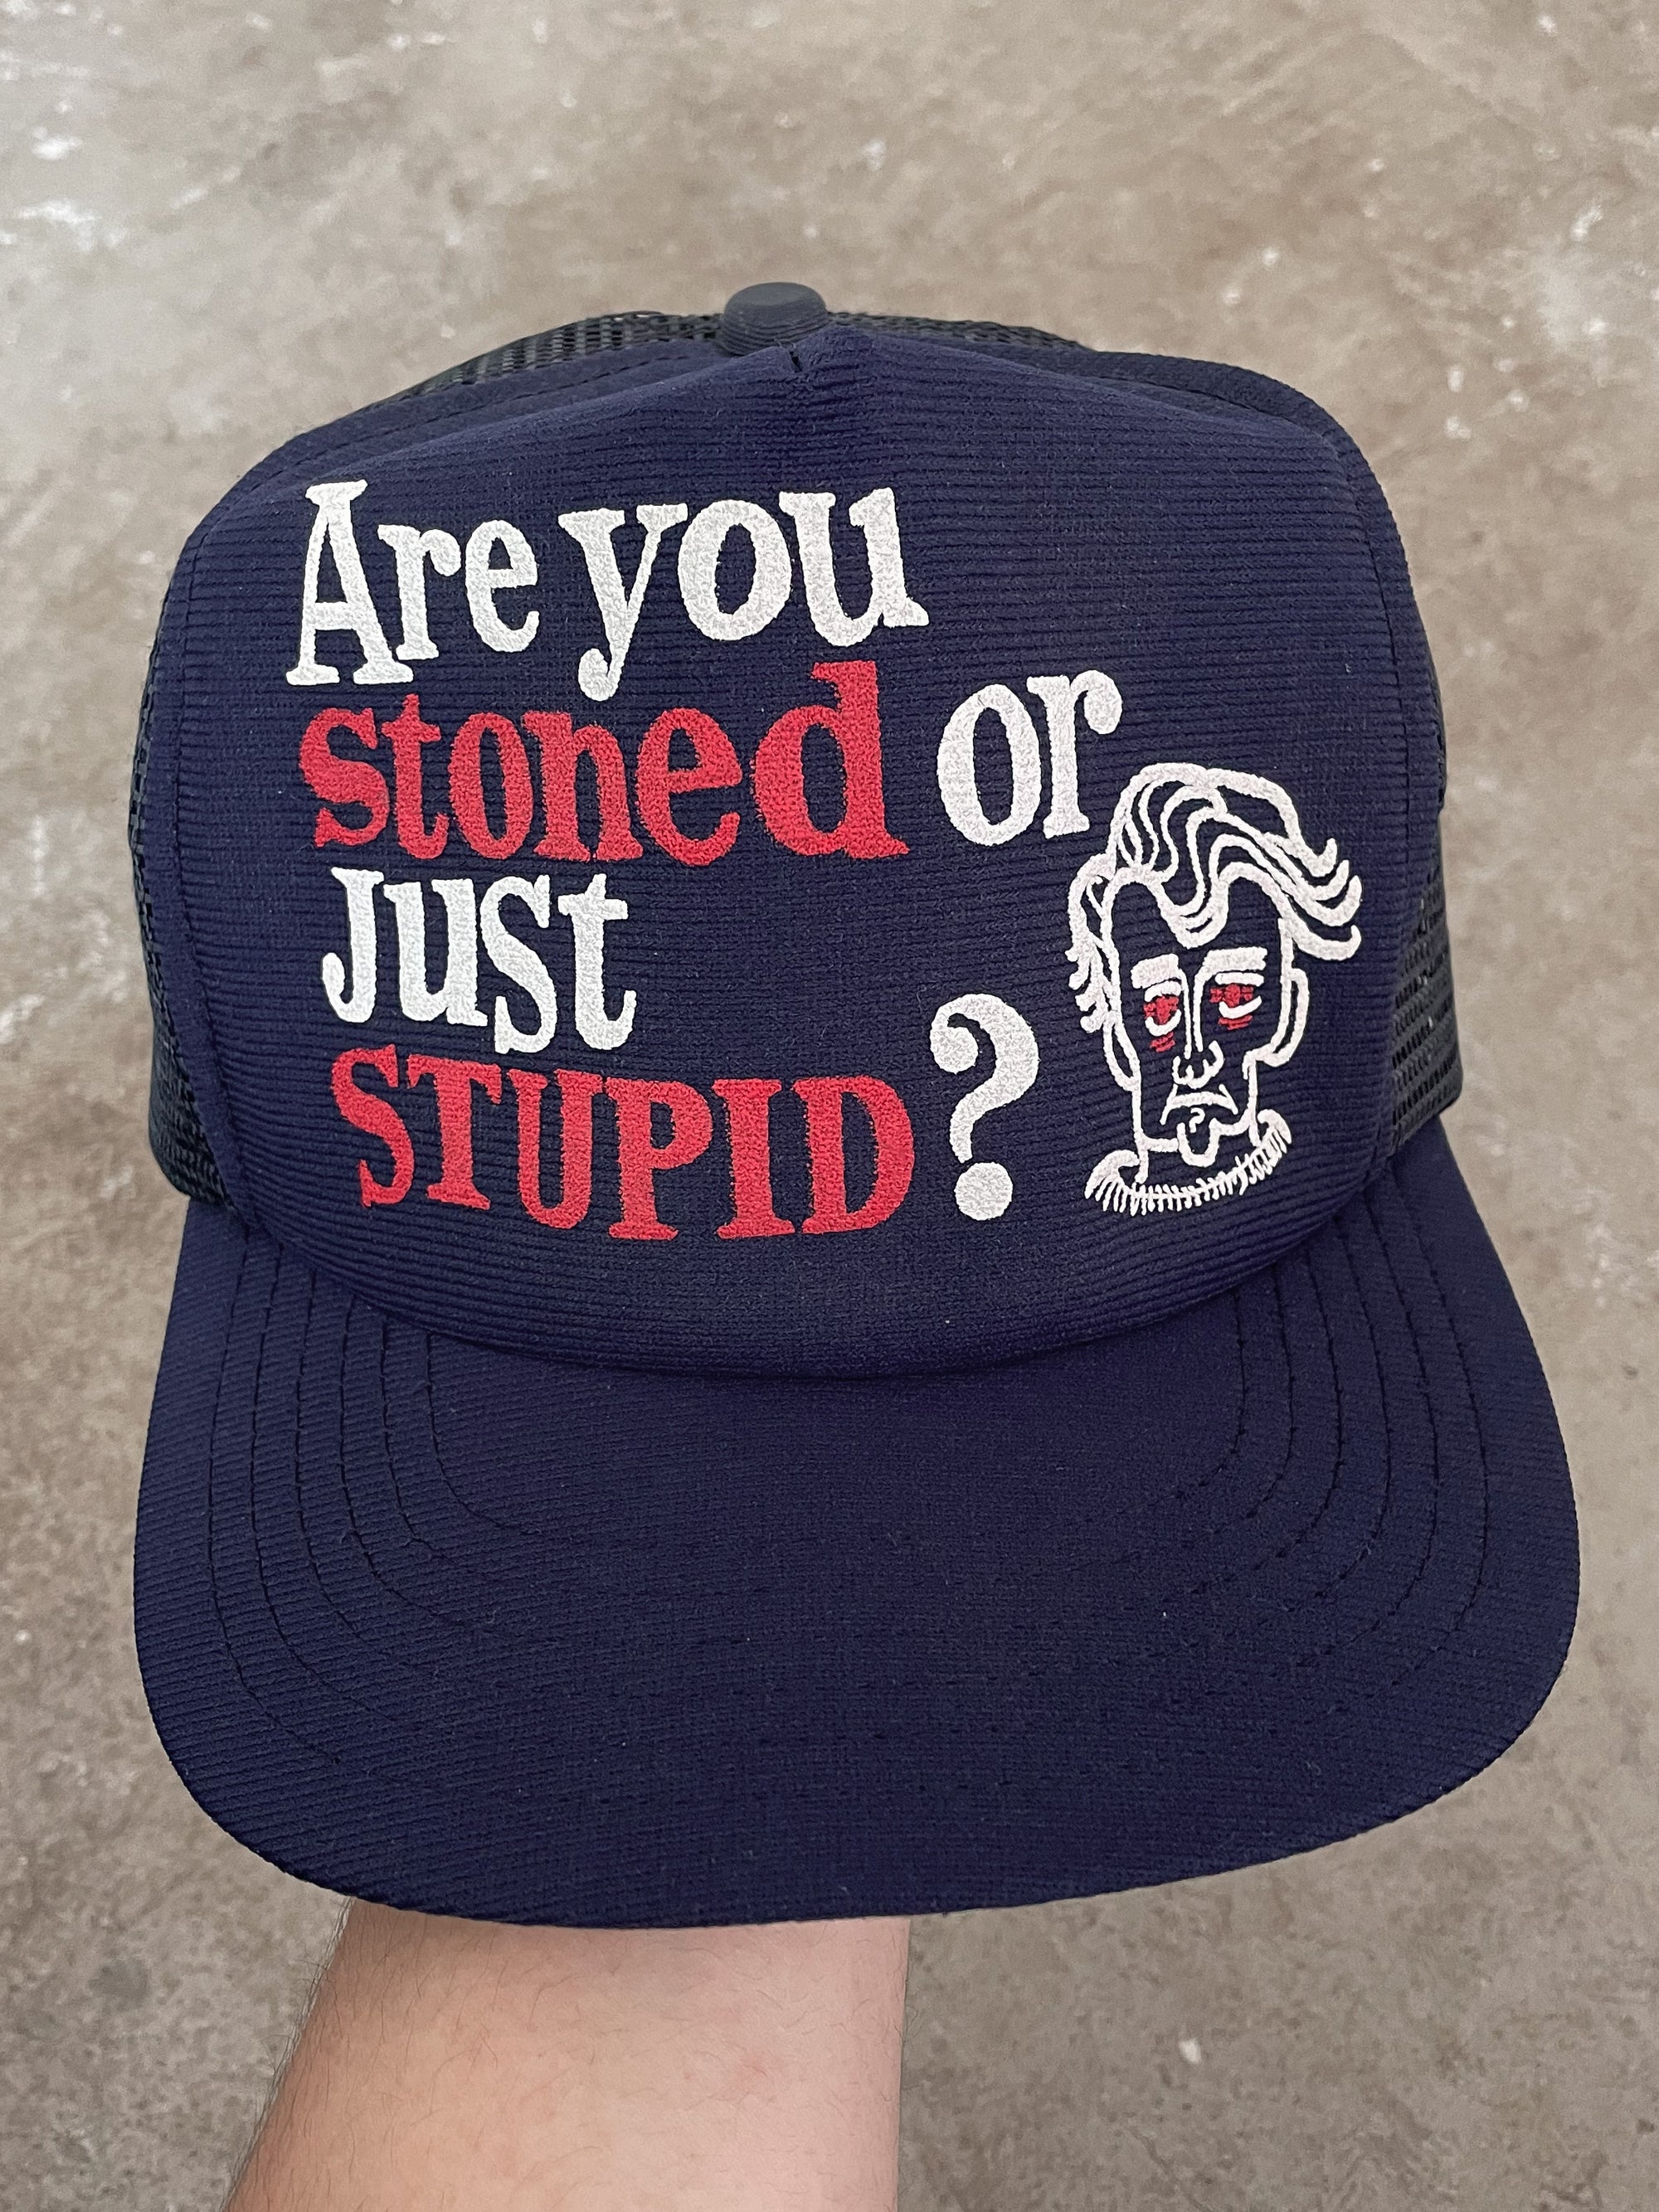 1980s “Are You Stoned Or Just Stupid?” Trucker Hat